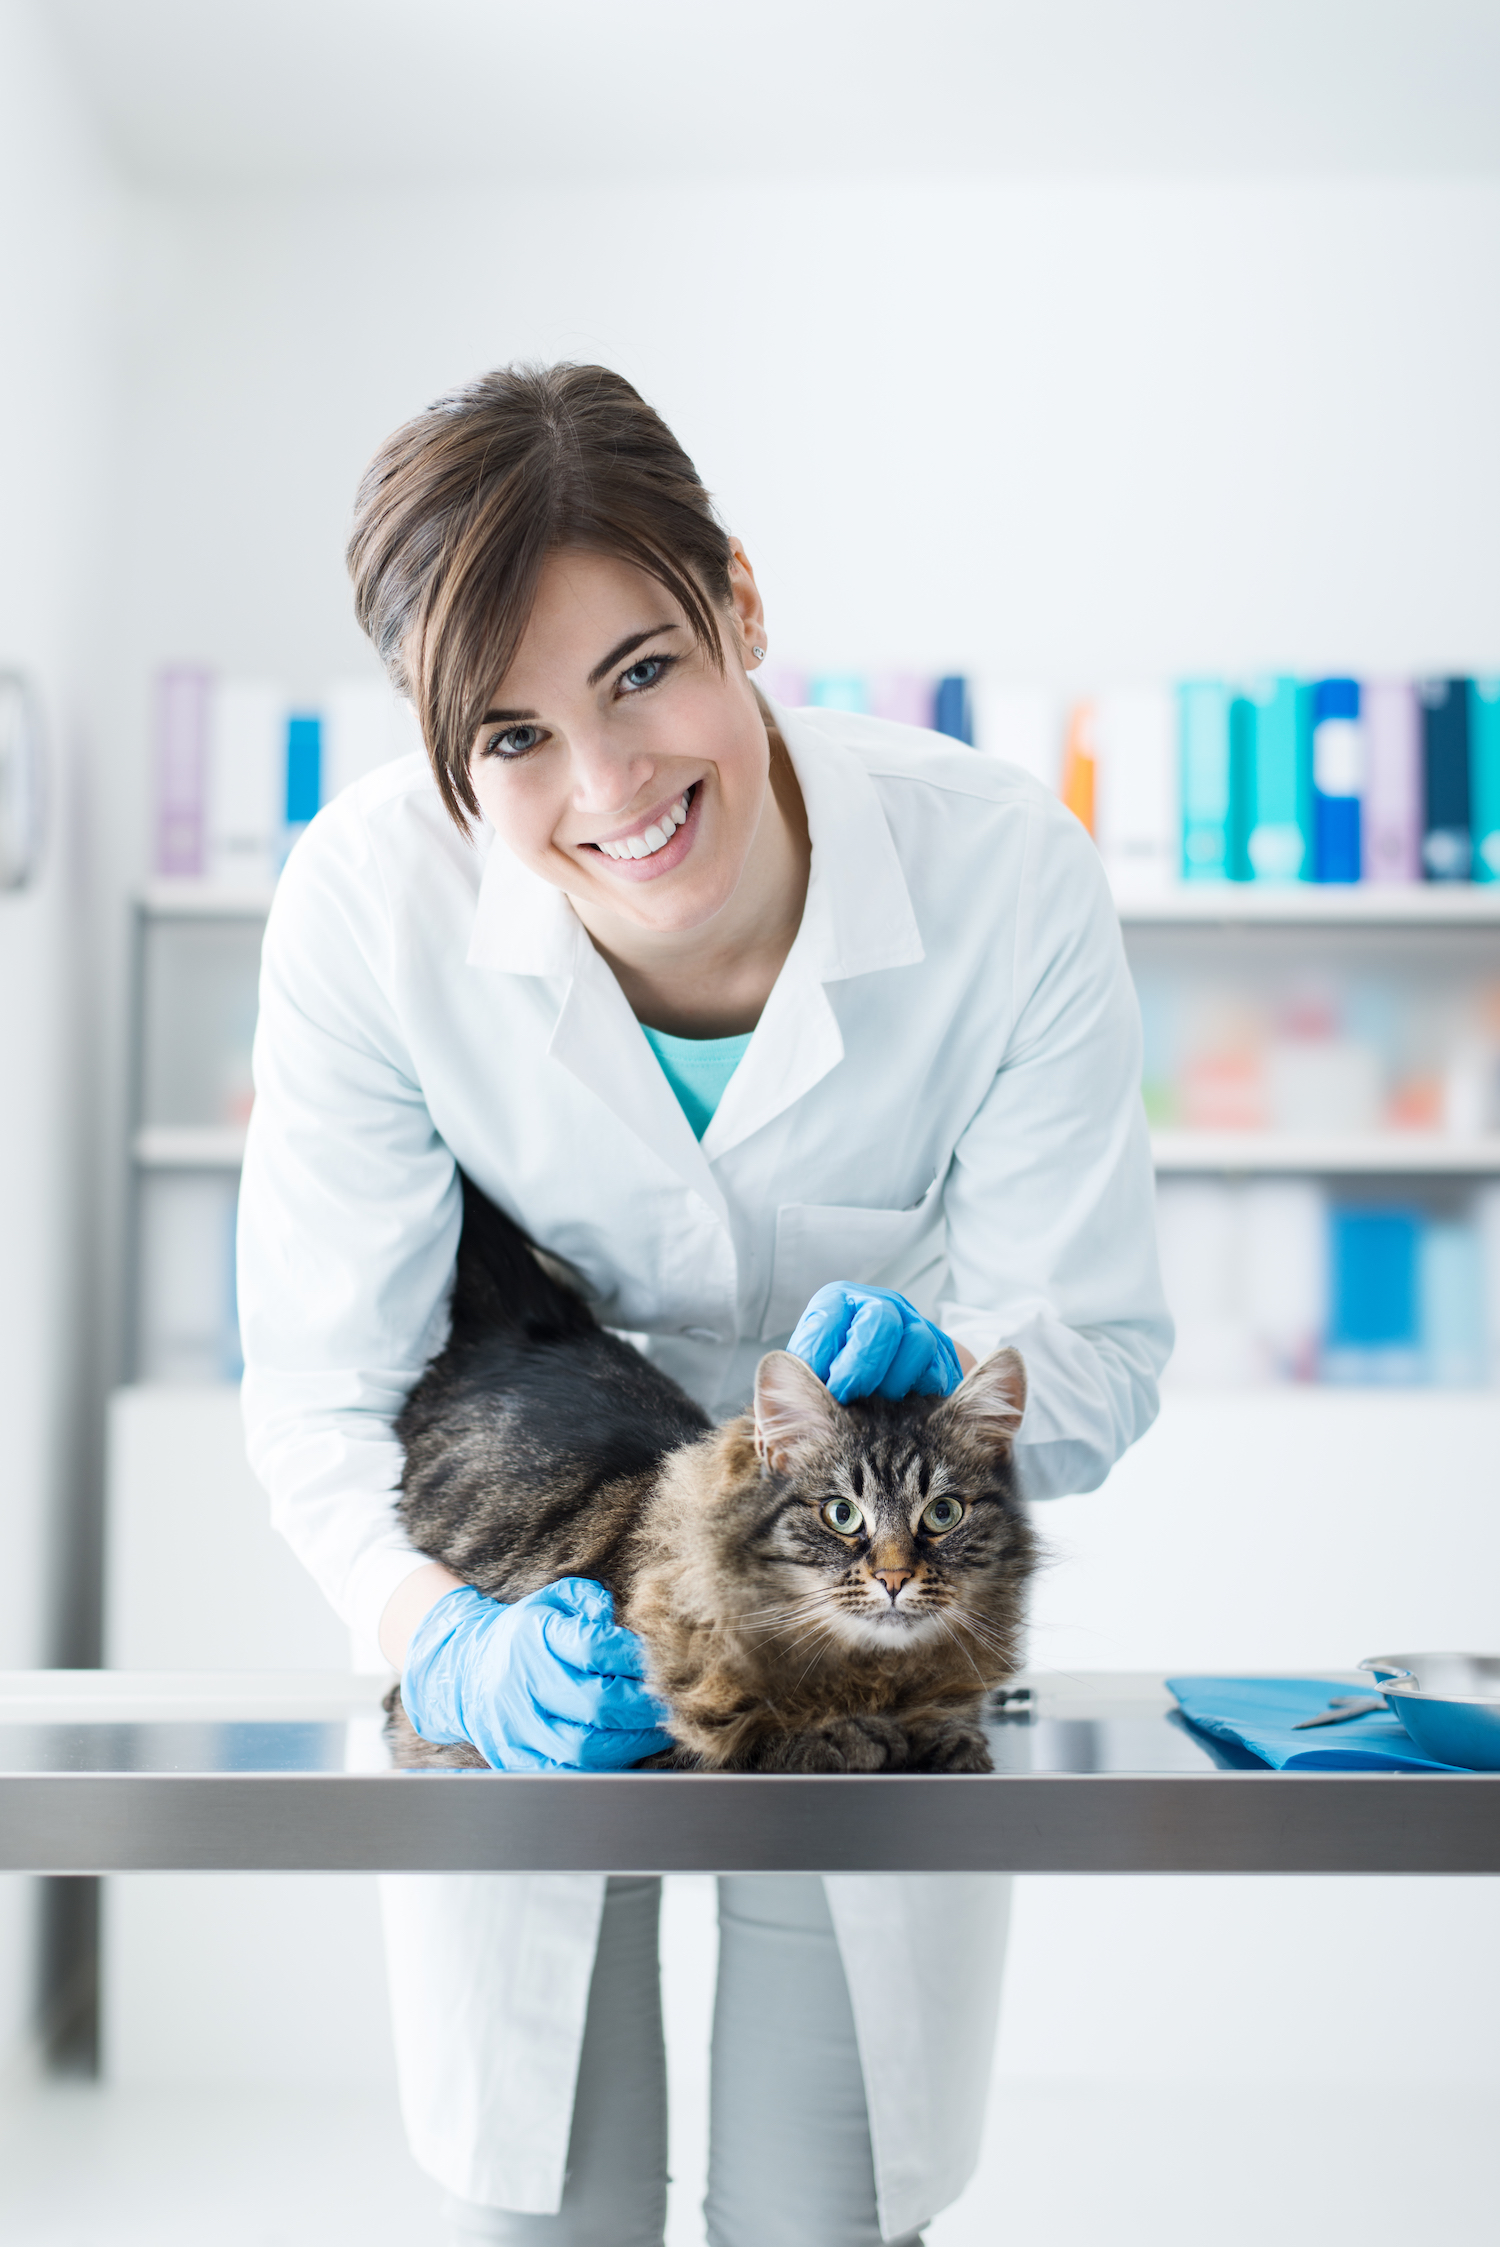 Veterinarian examining a cat on the surgical table, she is smiling at camera, pet care concept